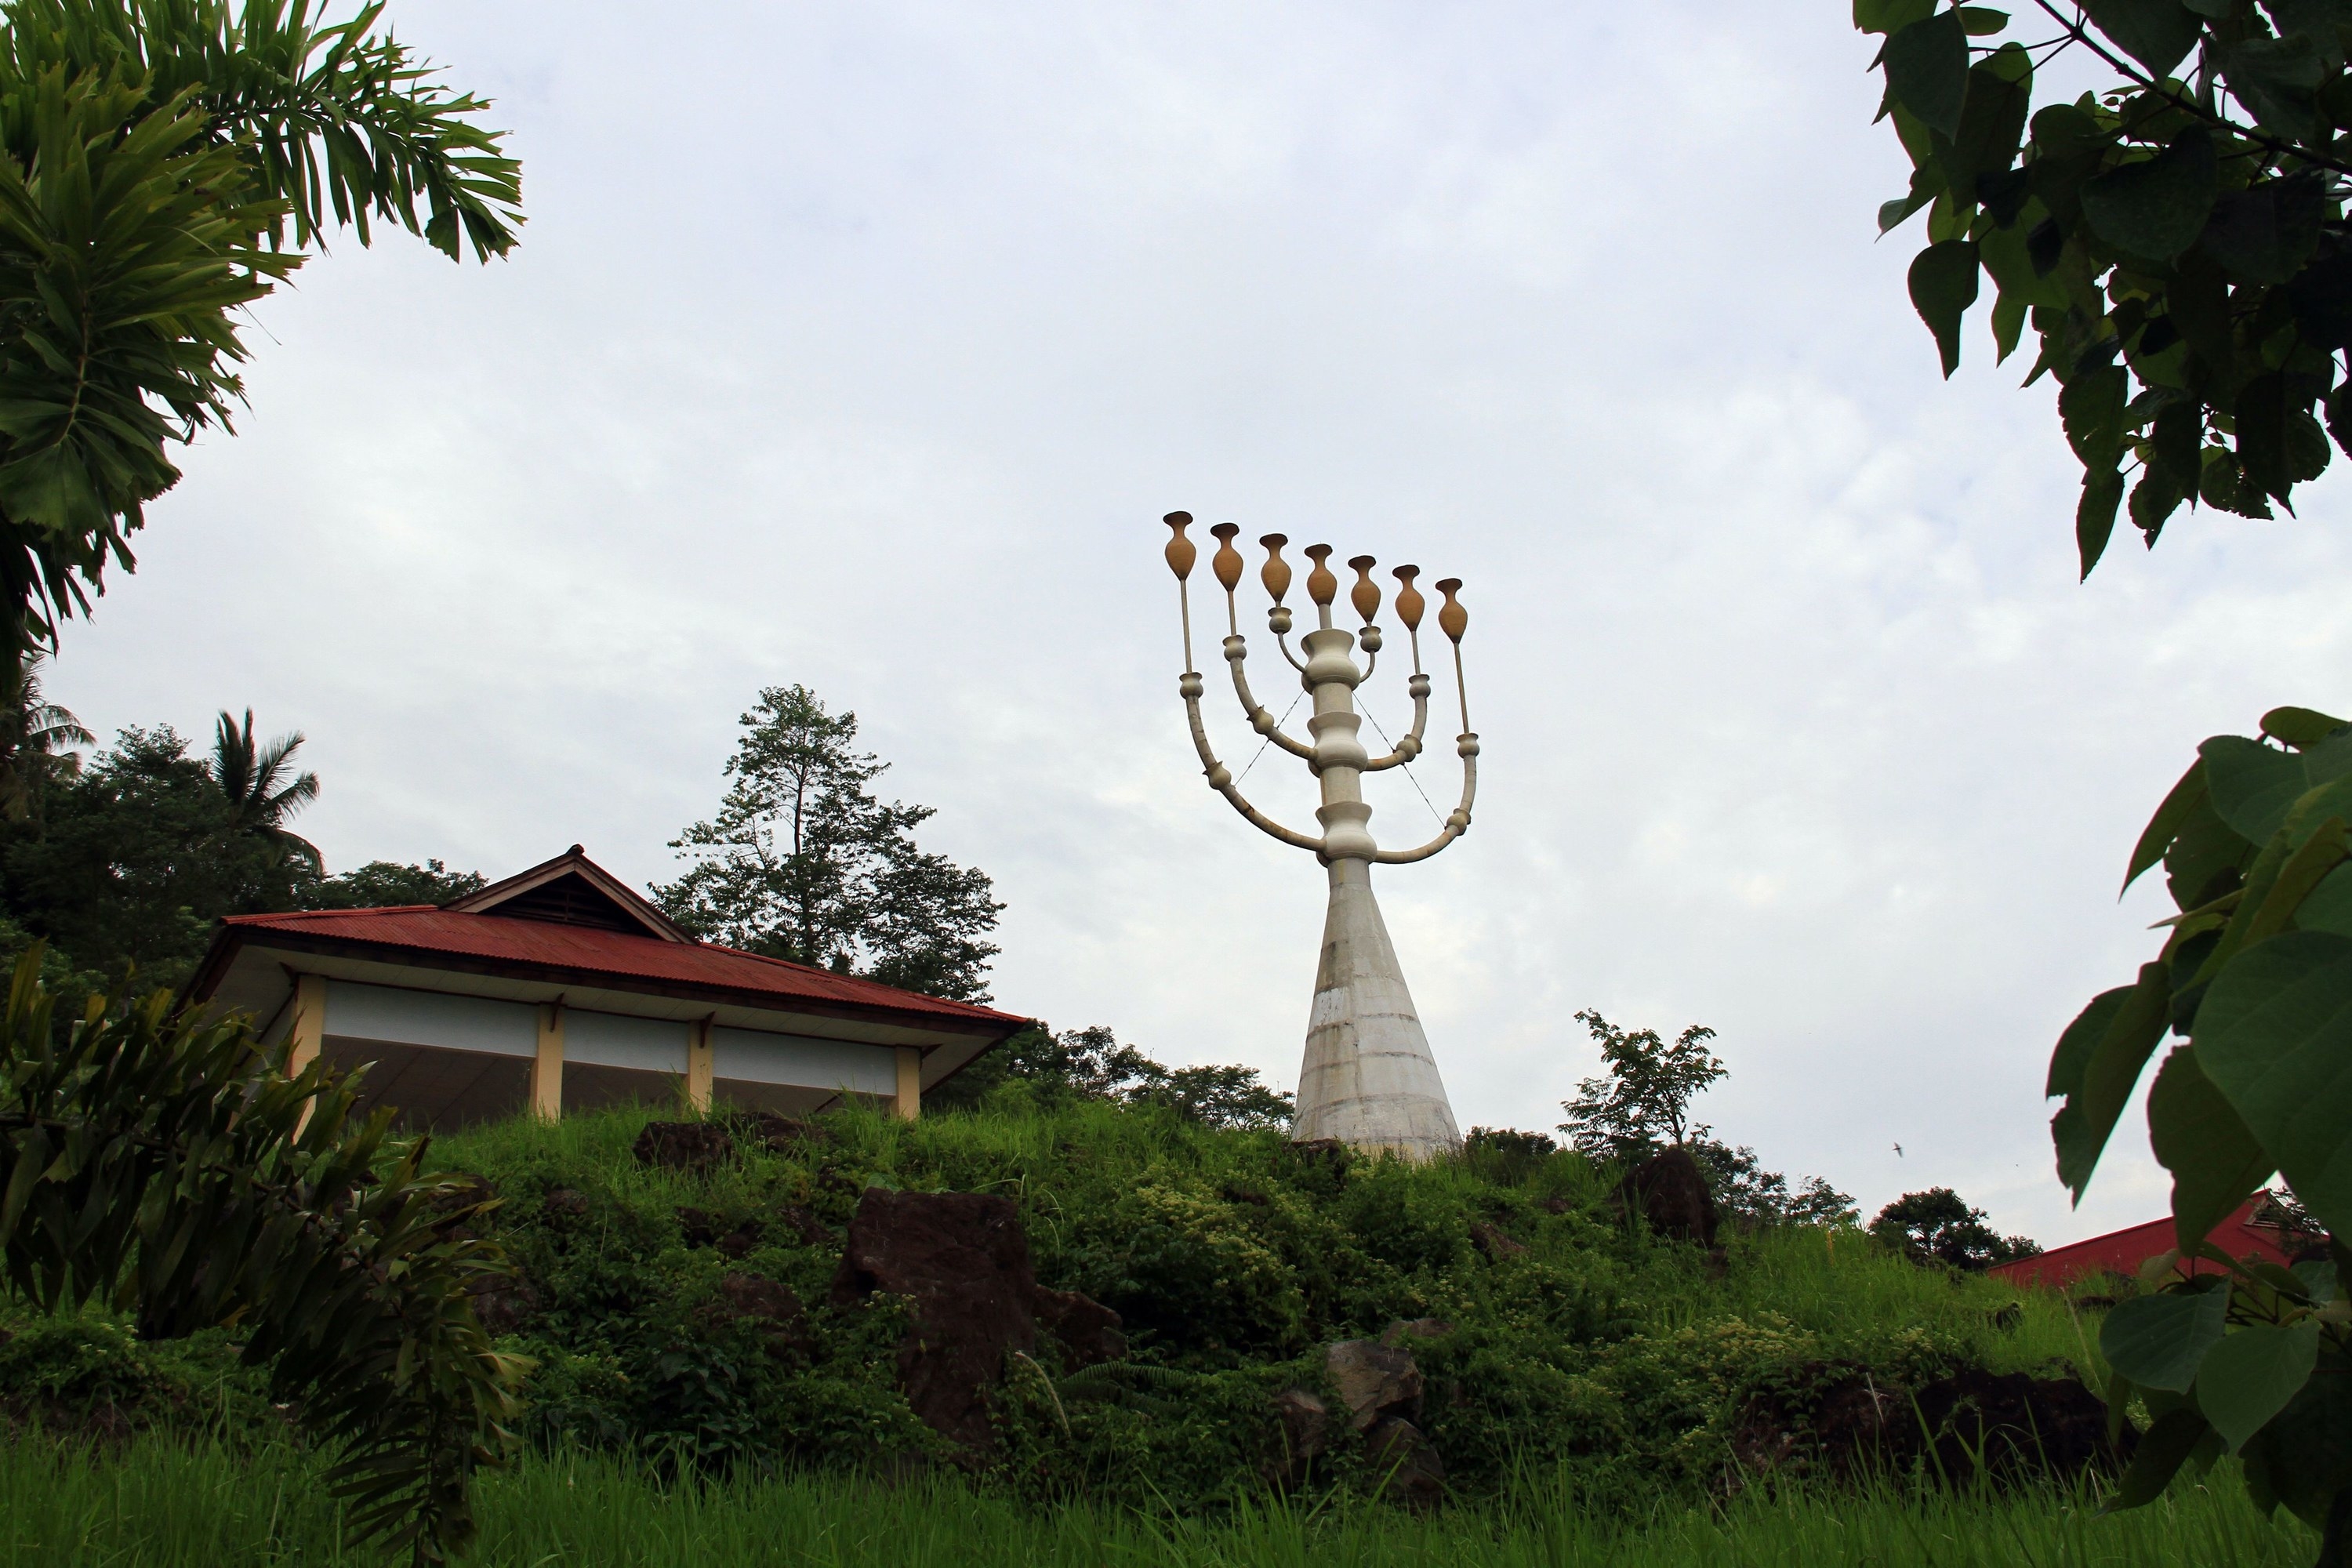 A large unlit menorah is photographed from below, next to a temple and with a lot of greenery 